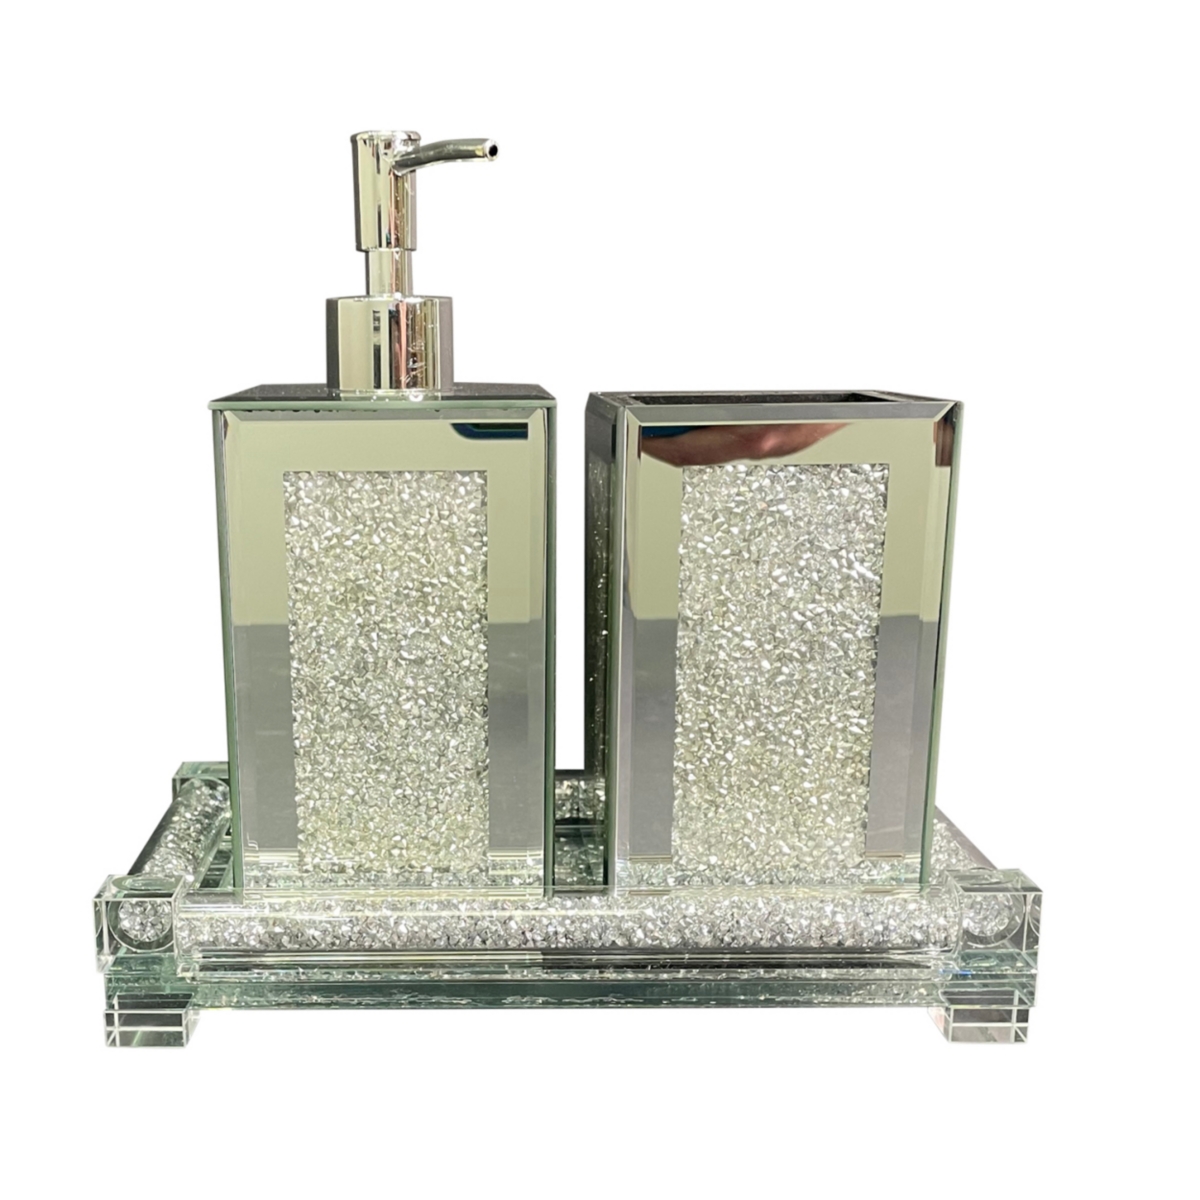 Exquisite 3 Piece Square Soap Dispenser And Toothbrush Holder With Tray - Silver